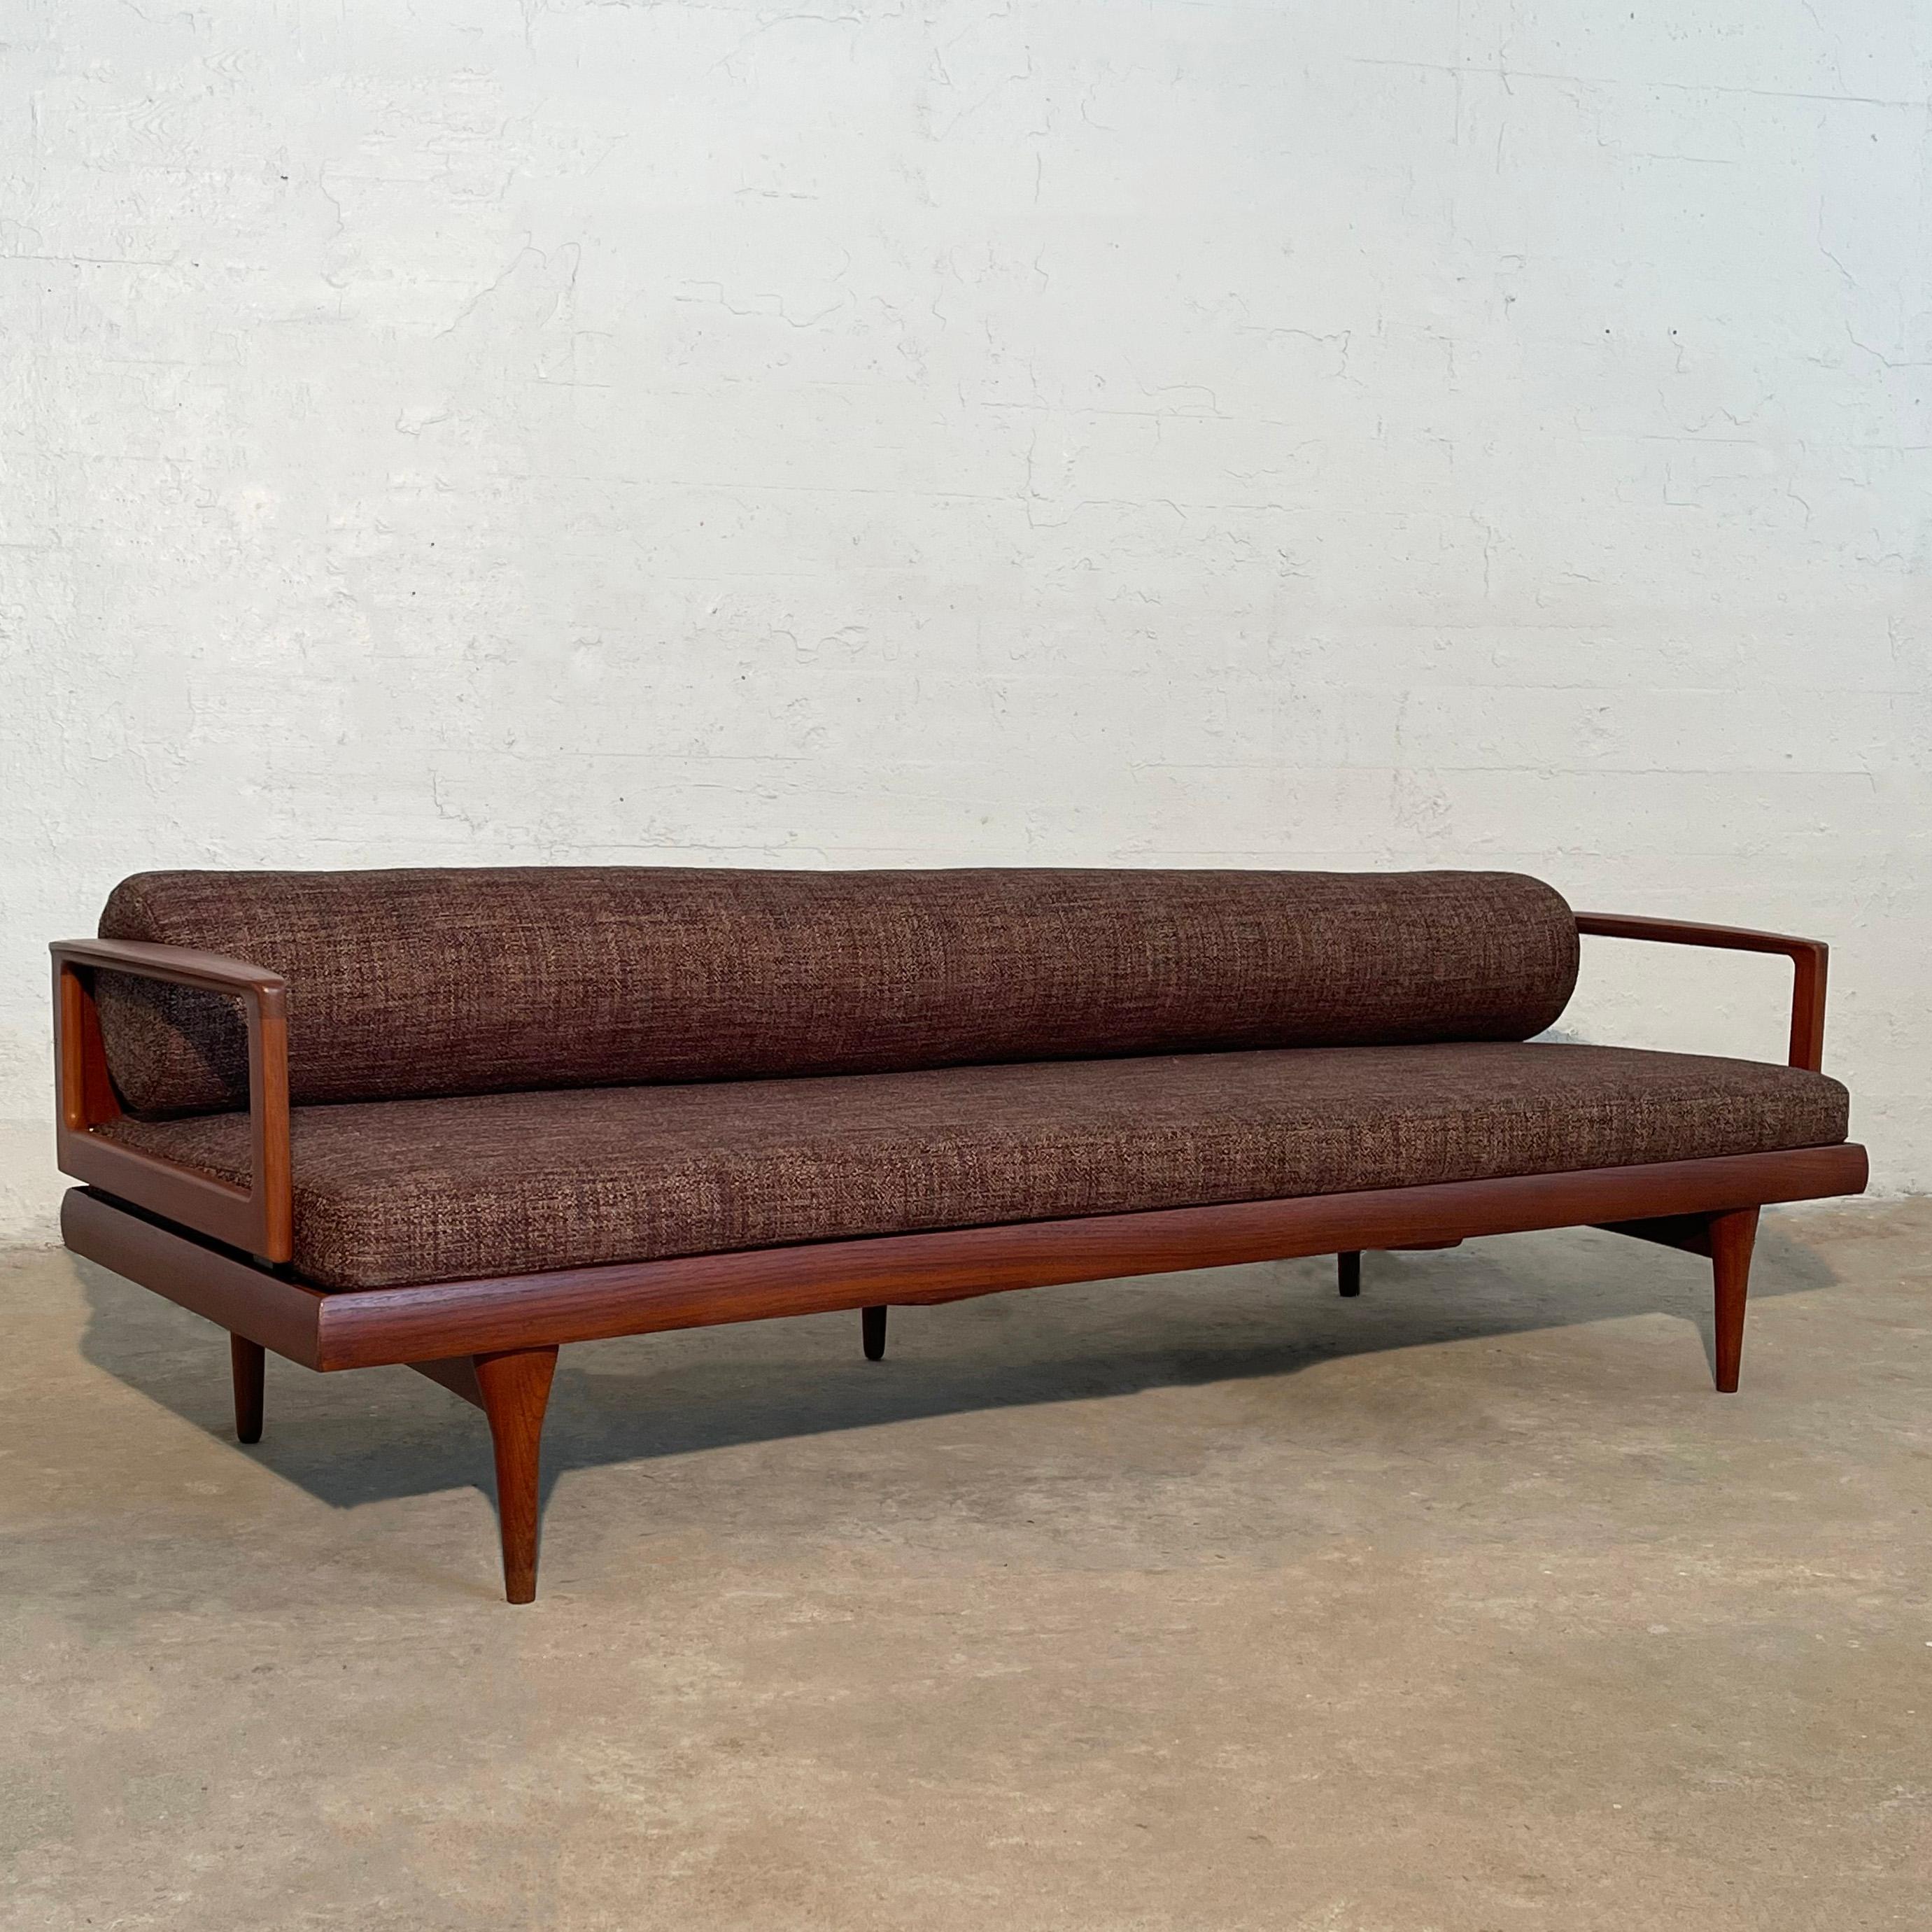 Sleek, low, Scandinavian modern, teak frame sofa features streamlined, chocolate brown tweed upholstery with rolled back cushion. The frame is minimal from the front and sides but features a fantastic geometric slat back. Gorgeous from every angle. 
